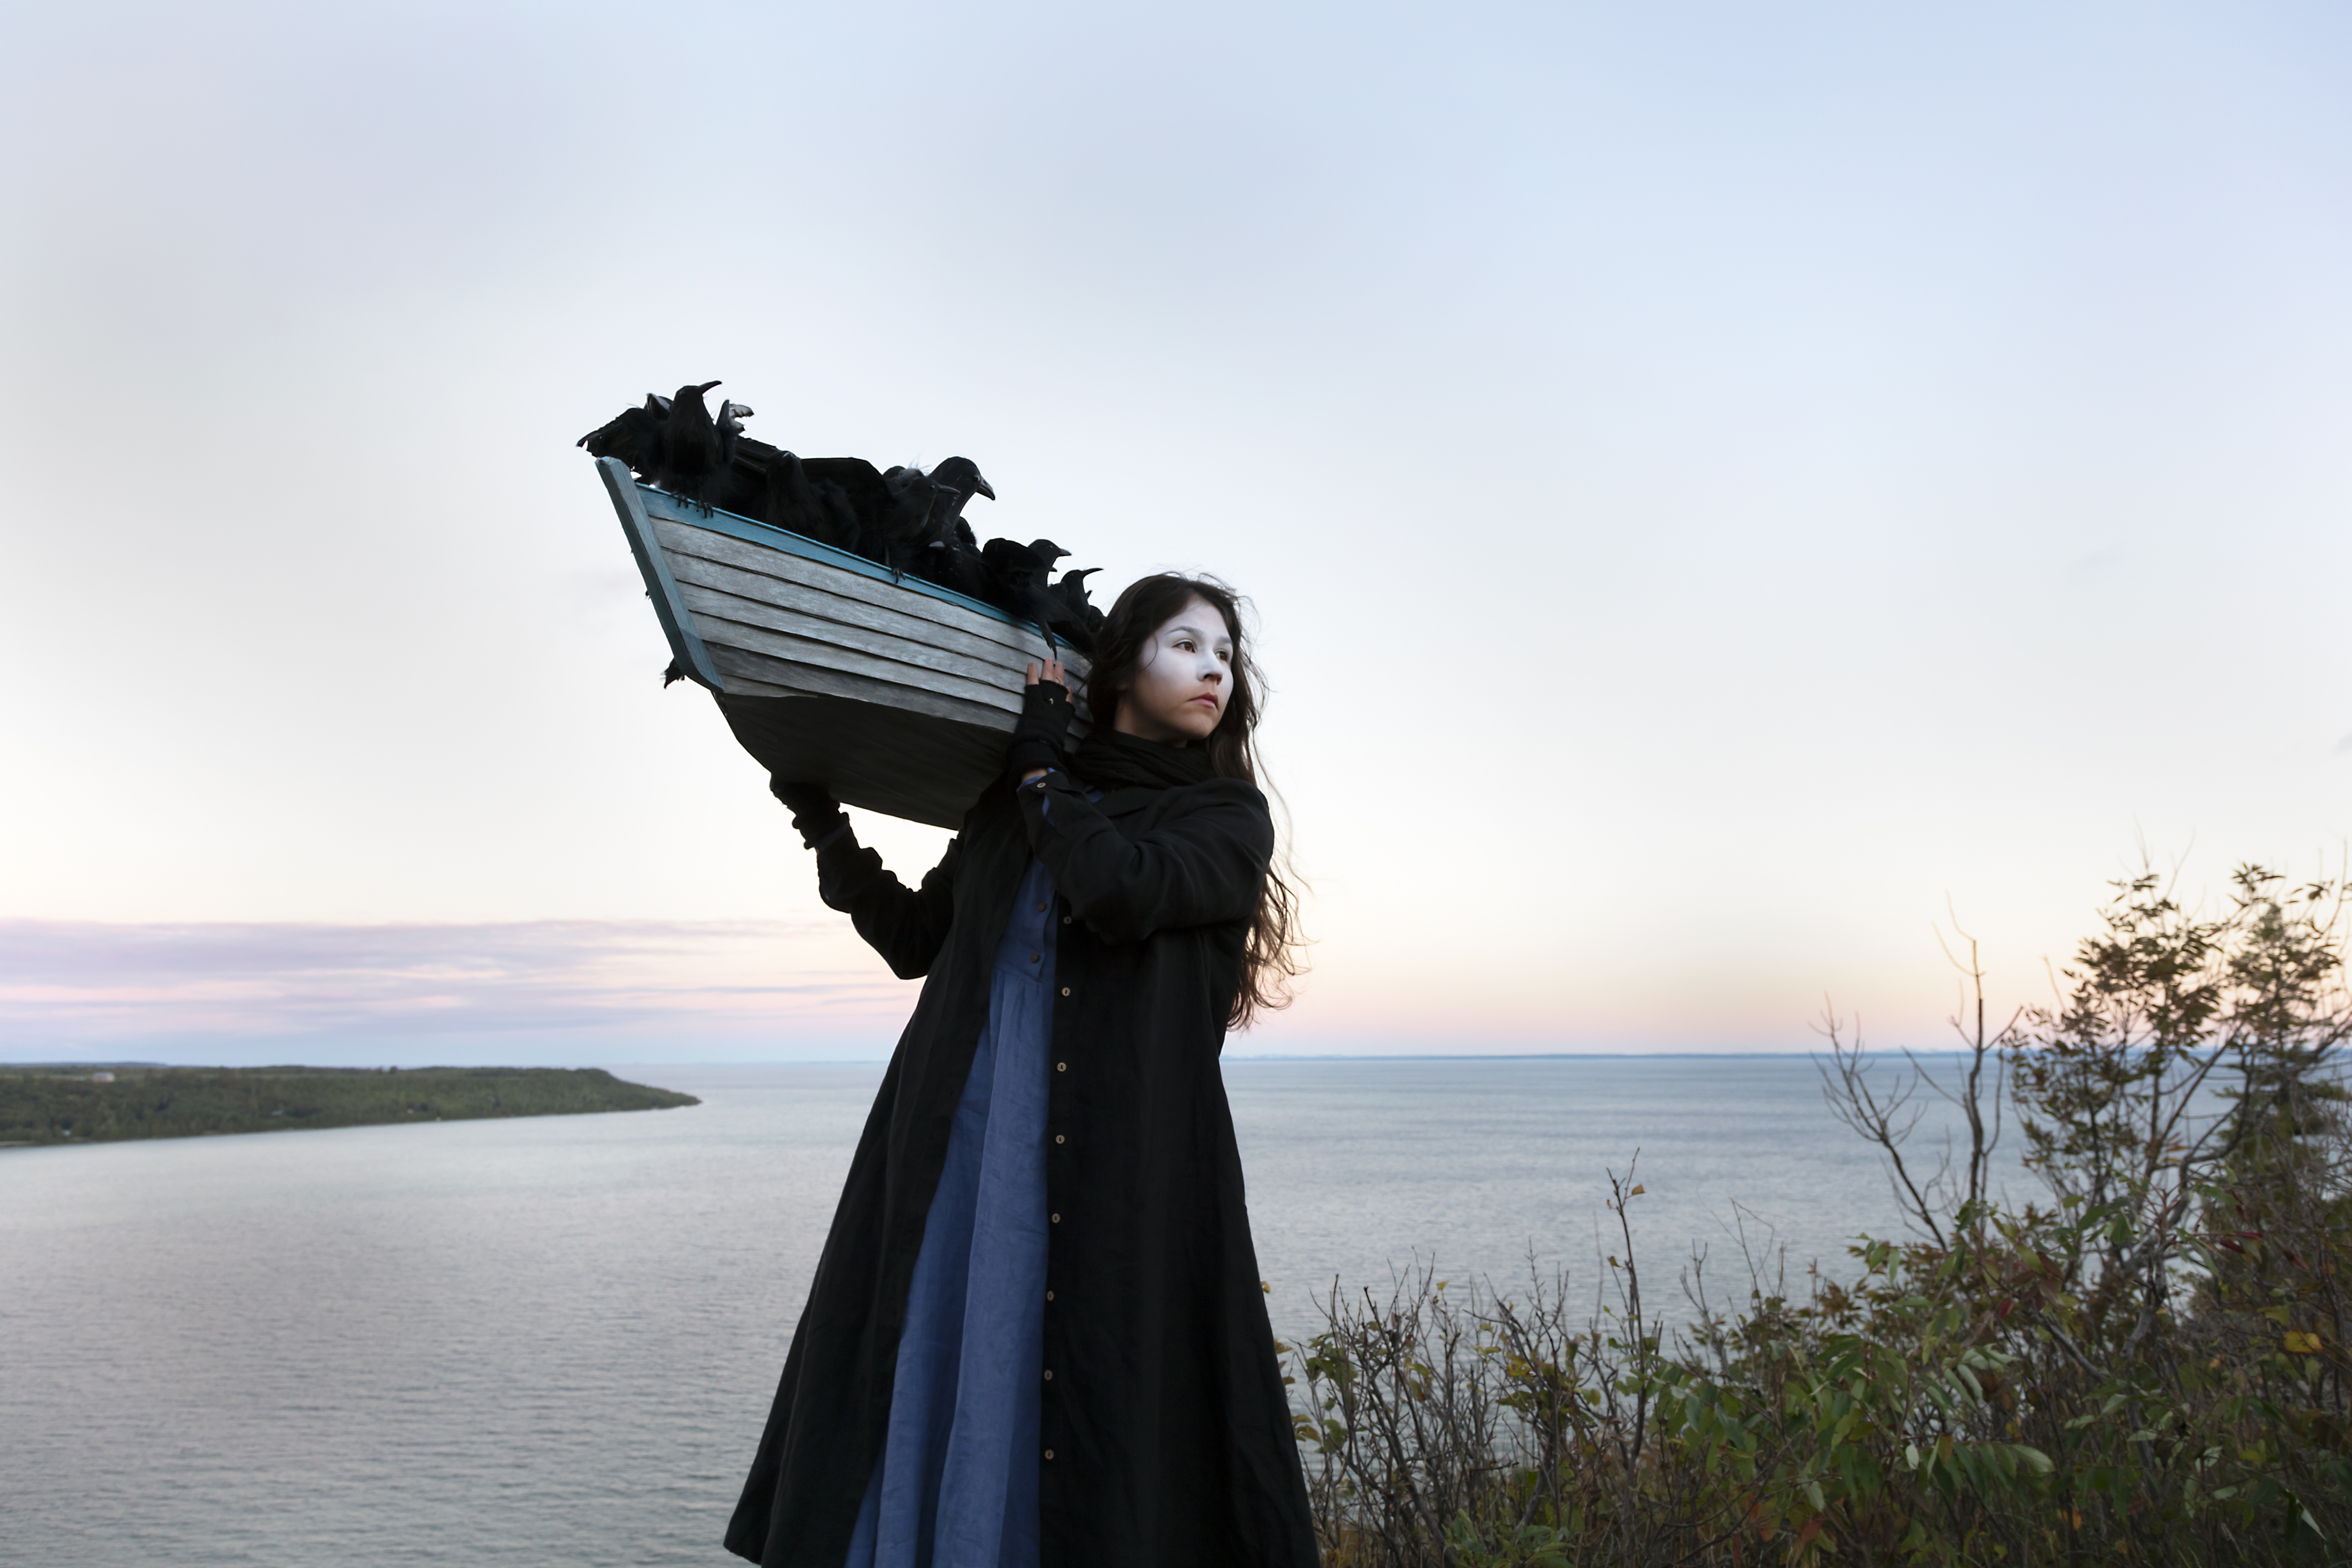 Meryl McMaster, On the Edge of this Immensity, 2019